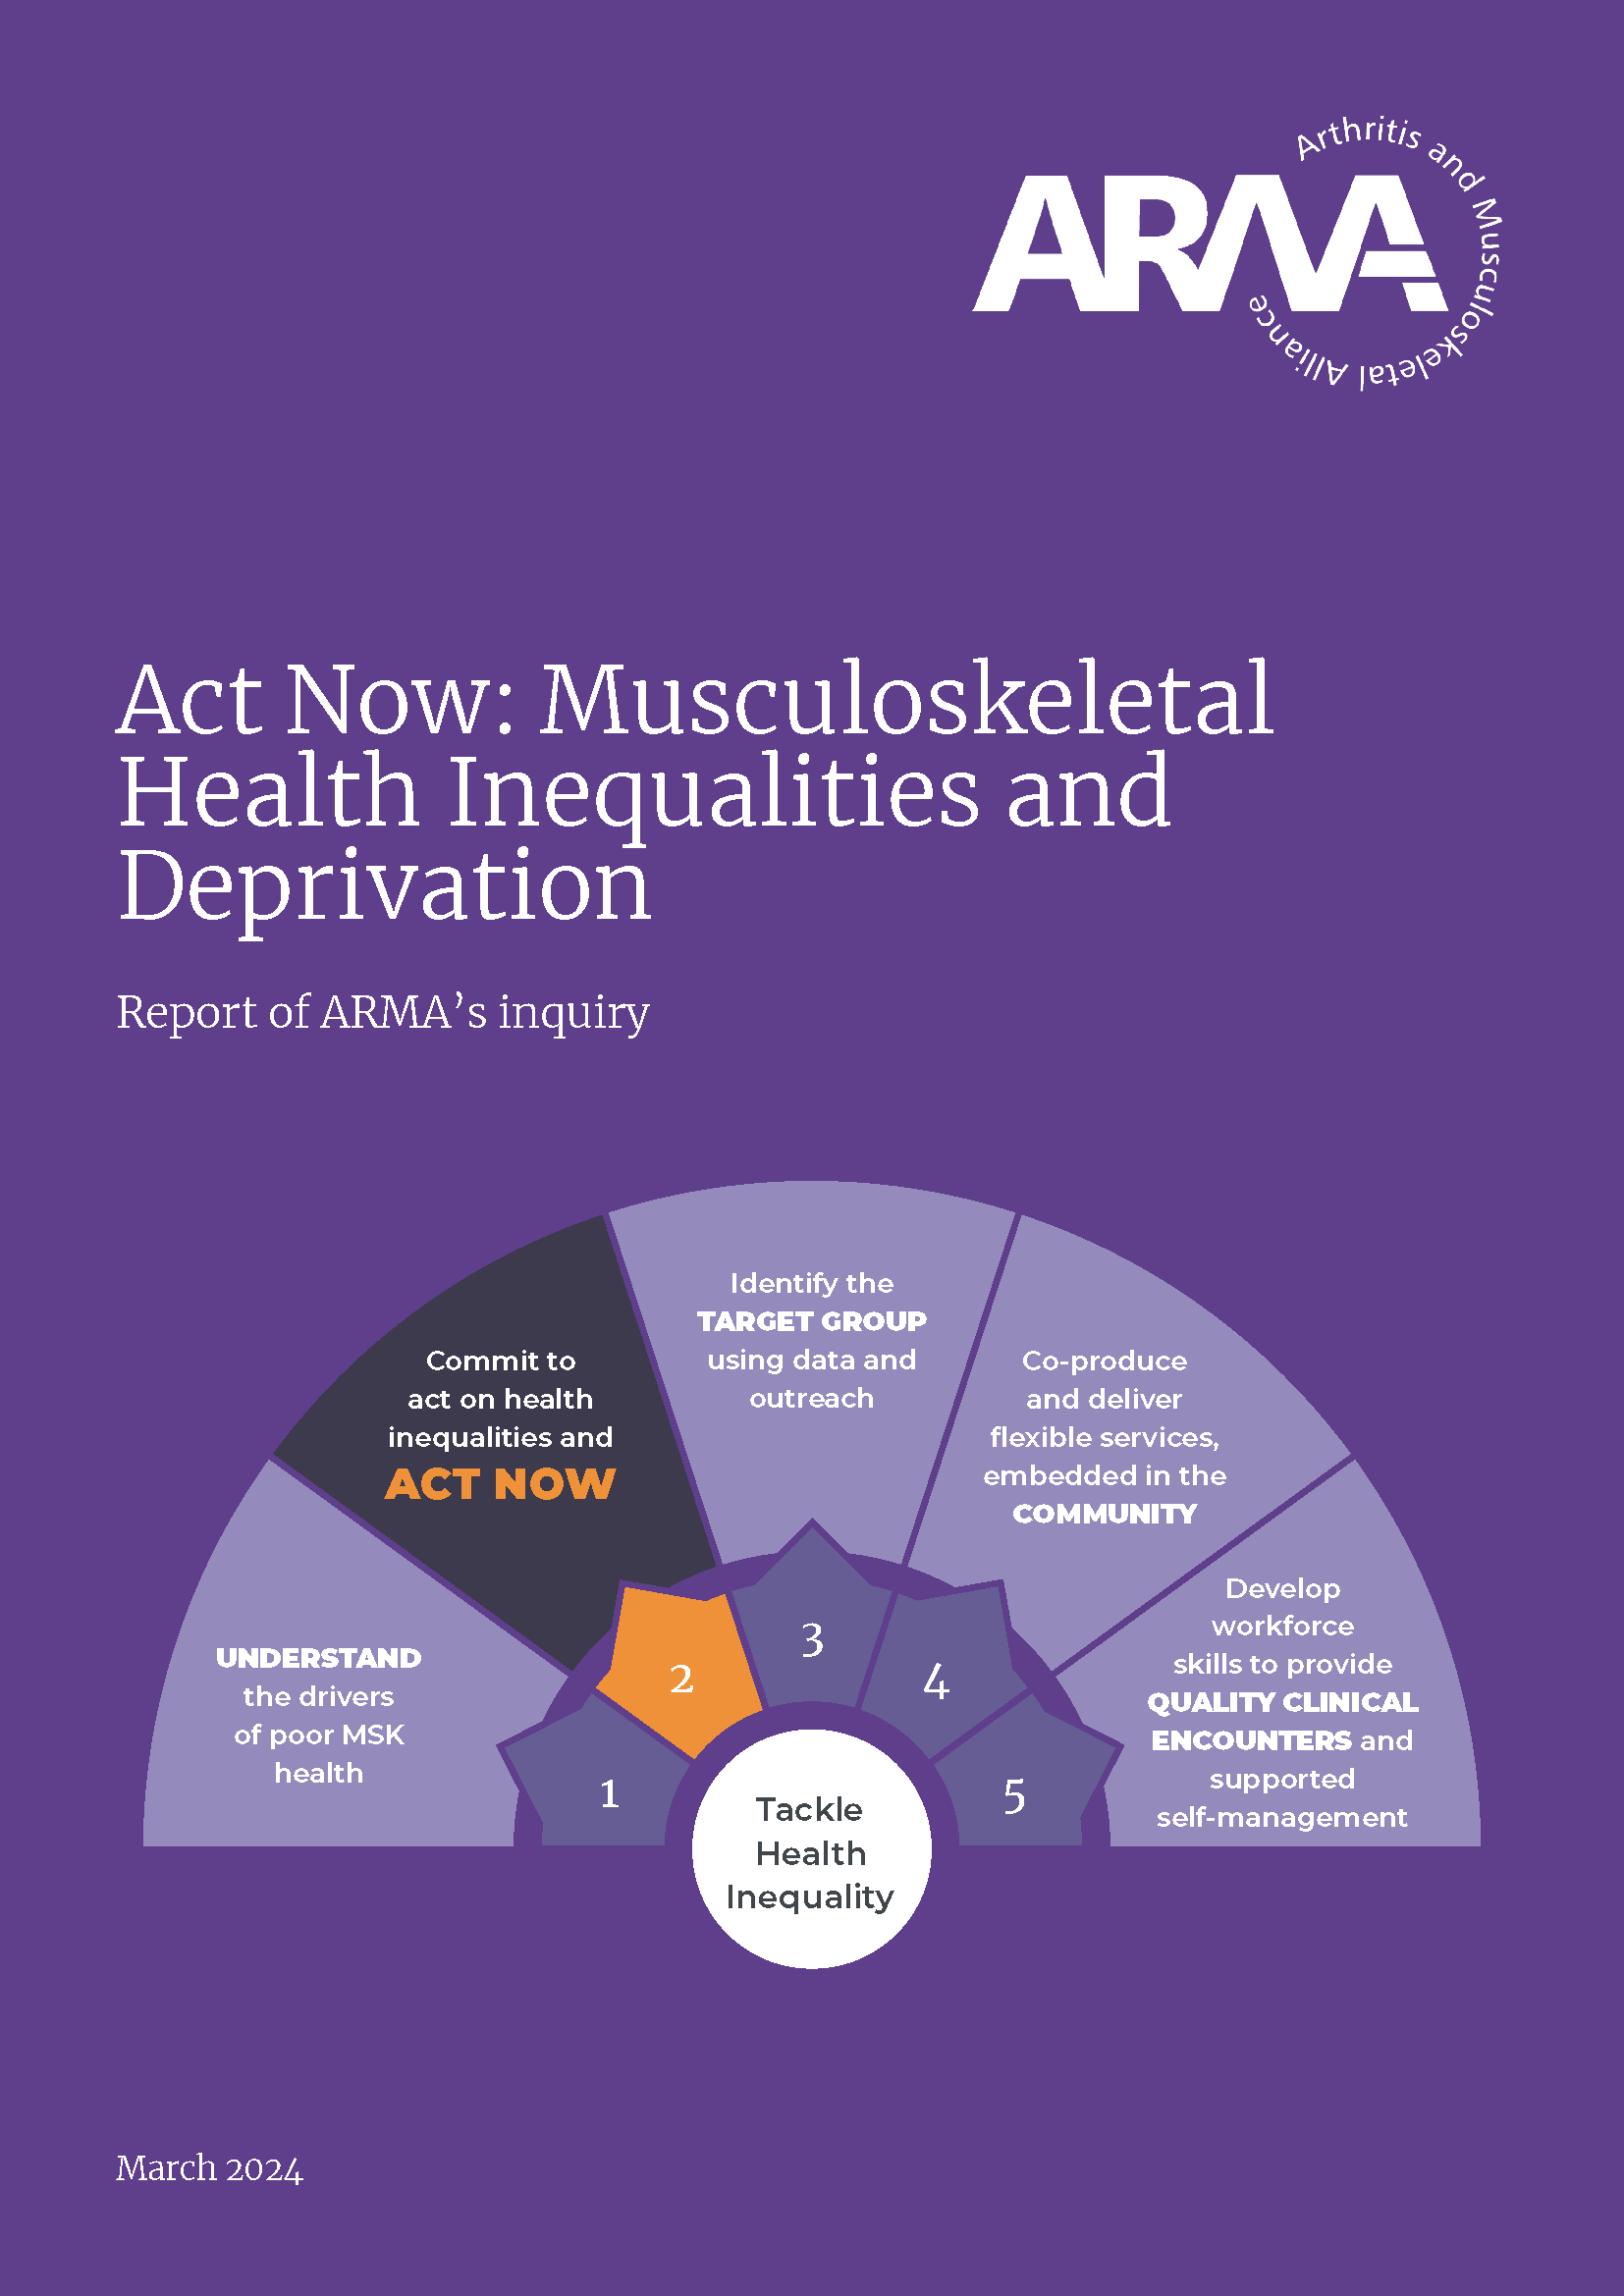 Act Now: Musculoskeletal Health Inequalities and Deprivation